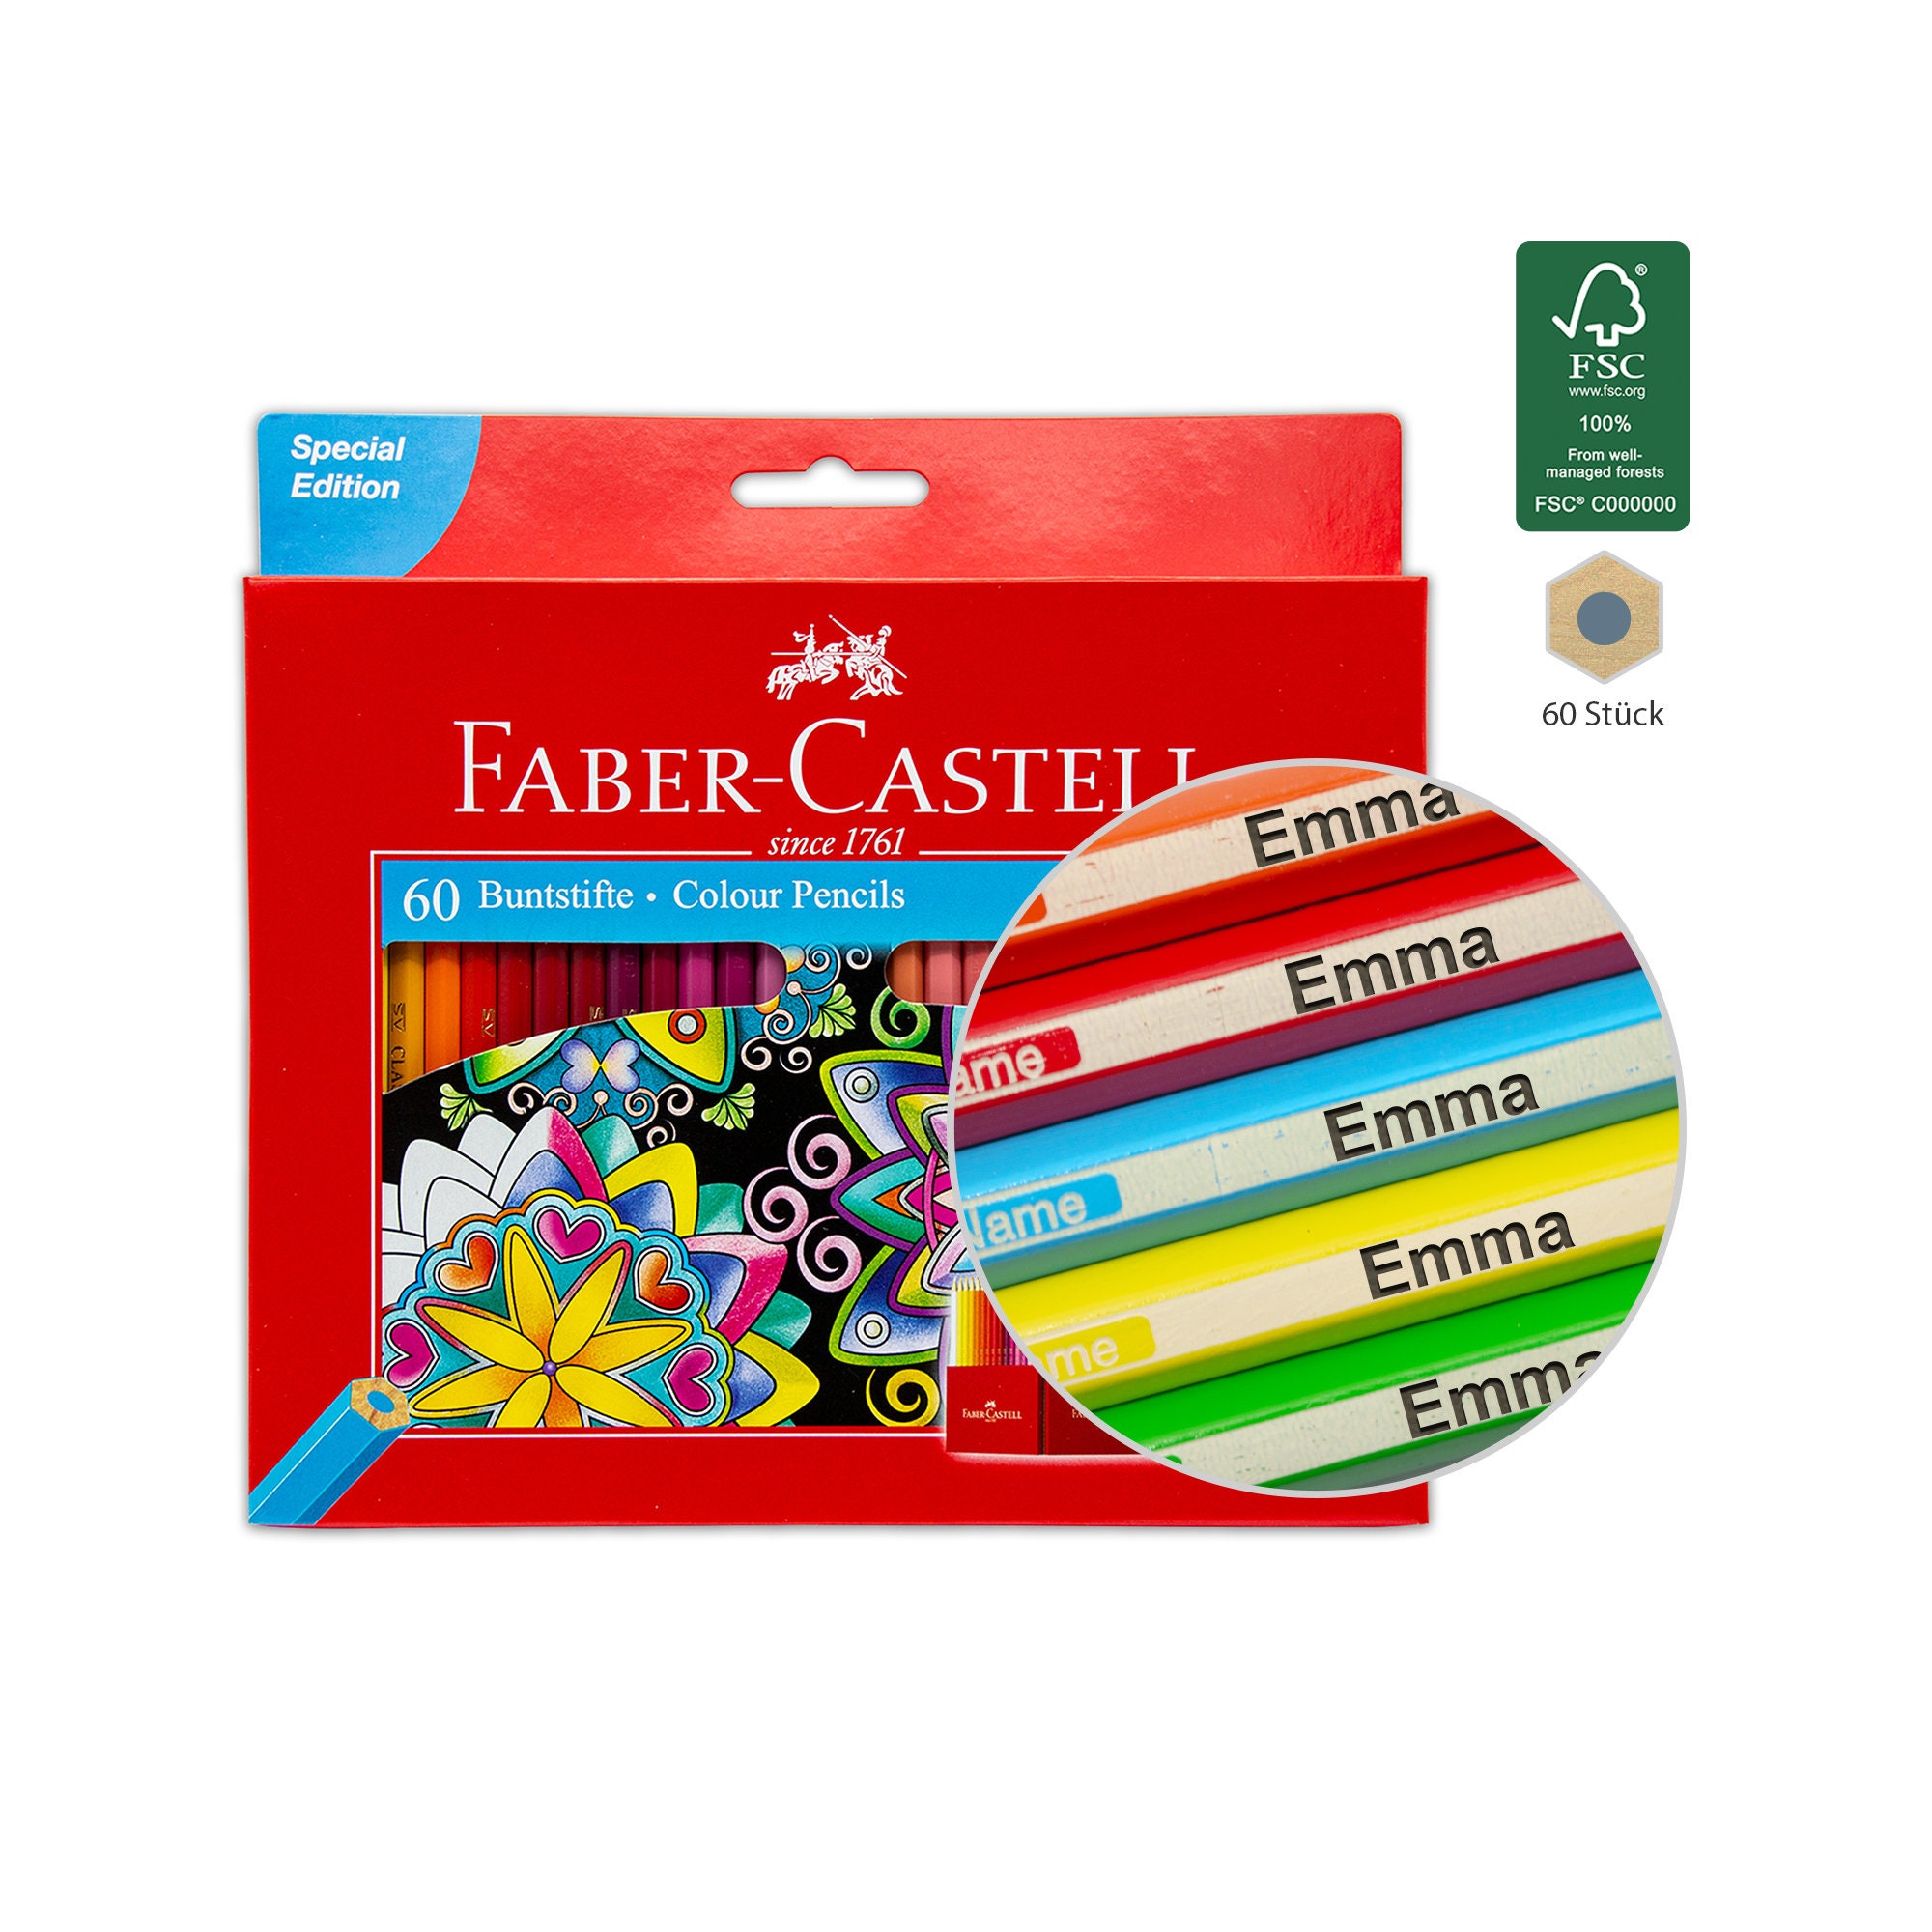 Faber castell 100 Colored Pencils And Case With Support Multicolor